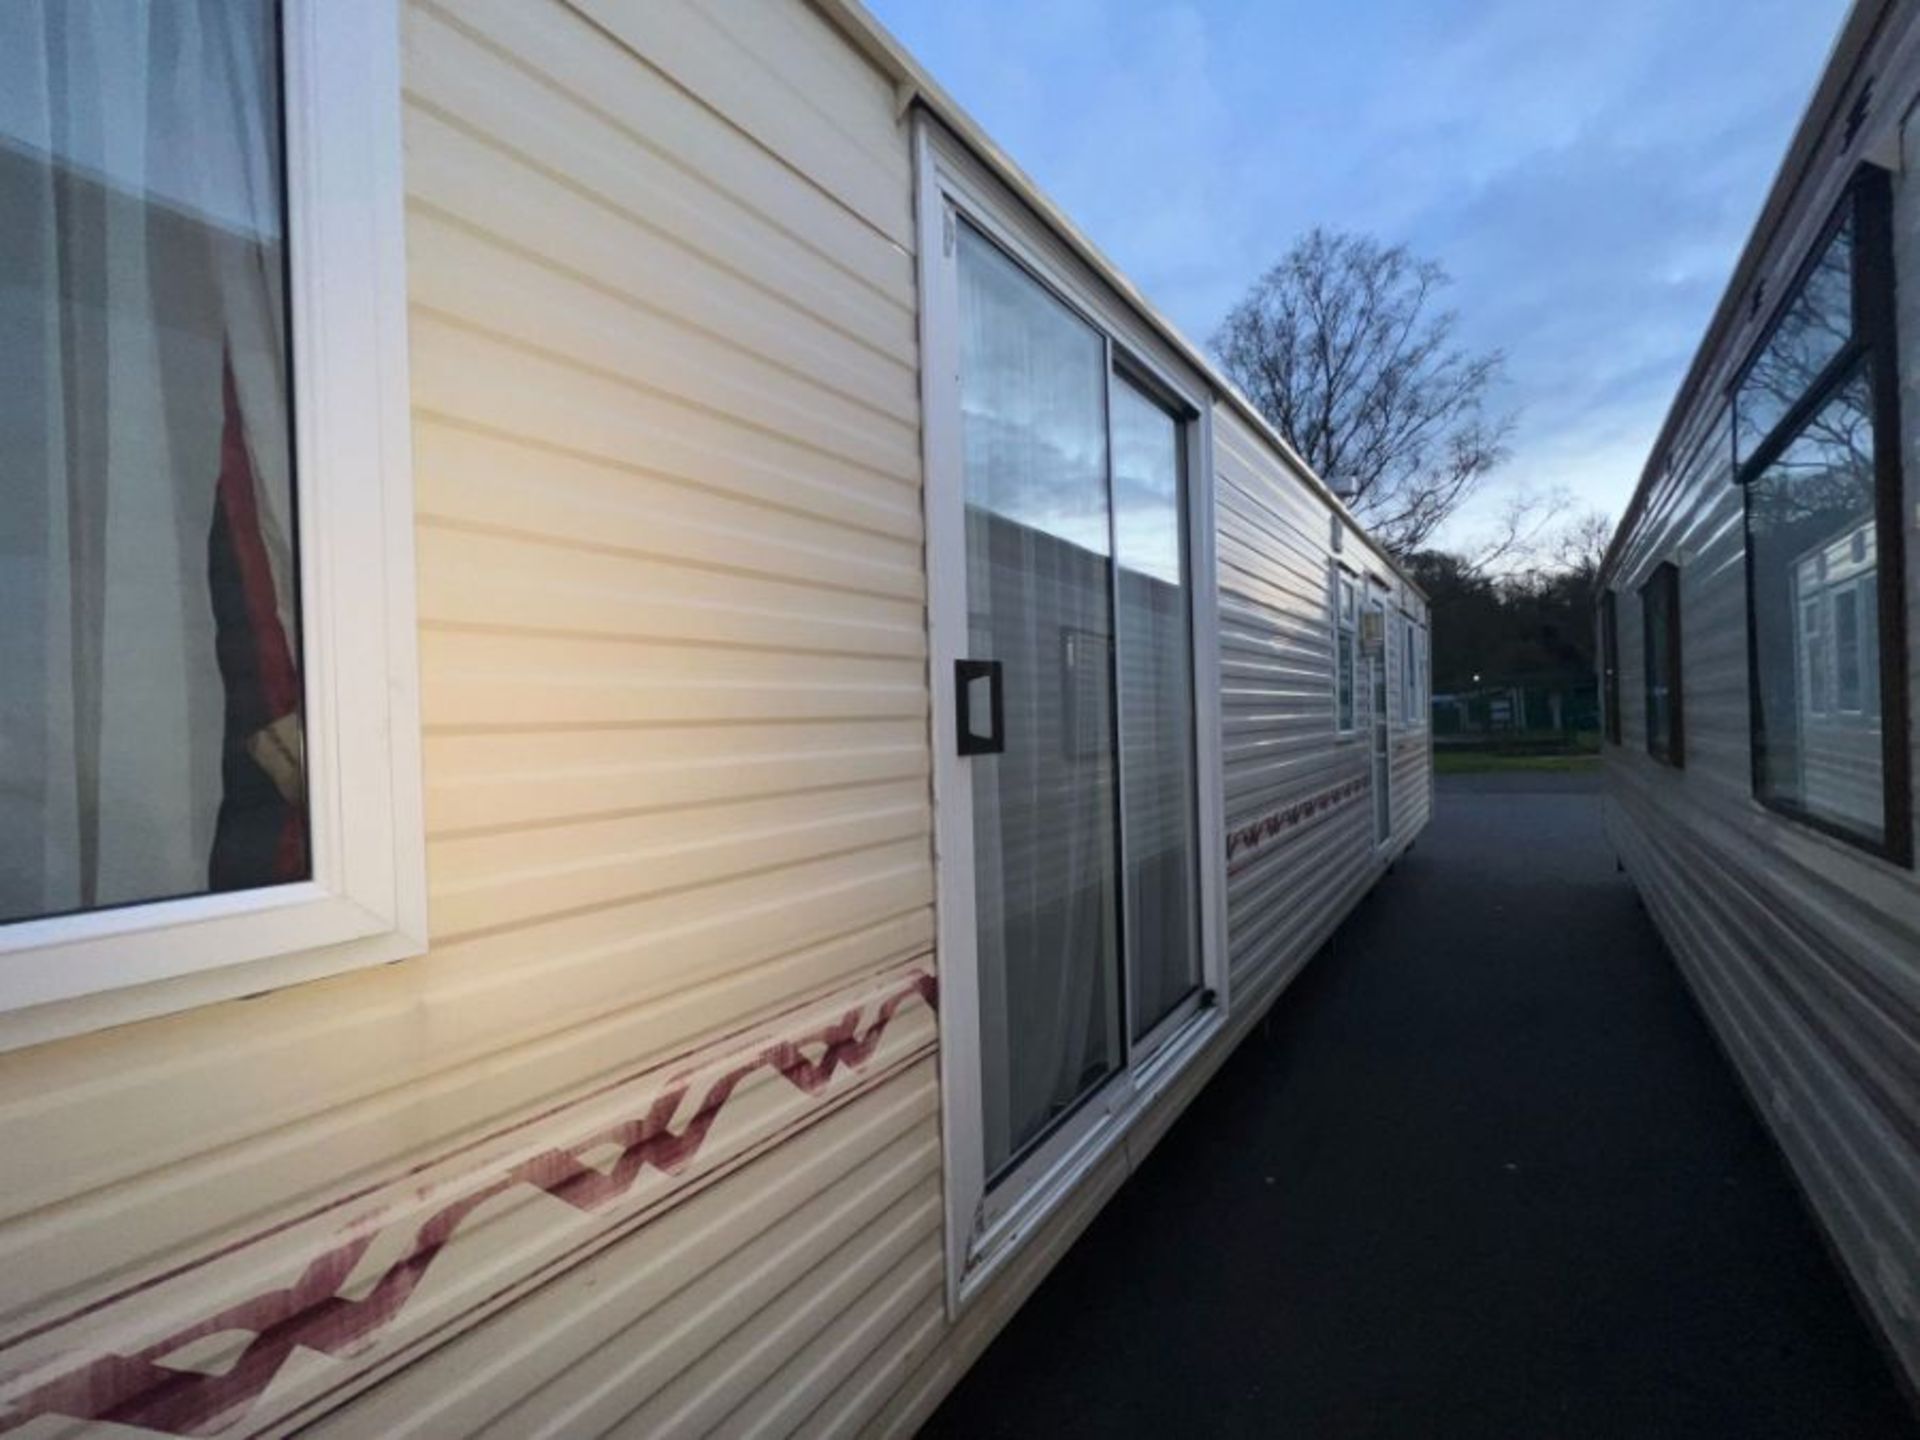 WILLERBY LYNDHURST 37FT X 12FT, 2 BEDROOM STATIC CARAVAN DOUBLE GLAZED & CENTRAL HEATING - LOCATED - Image 28 of 50